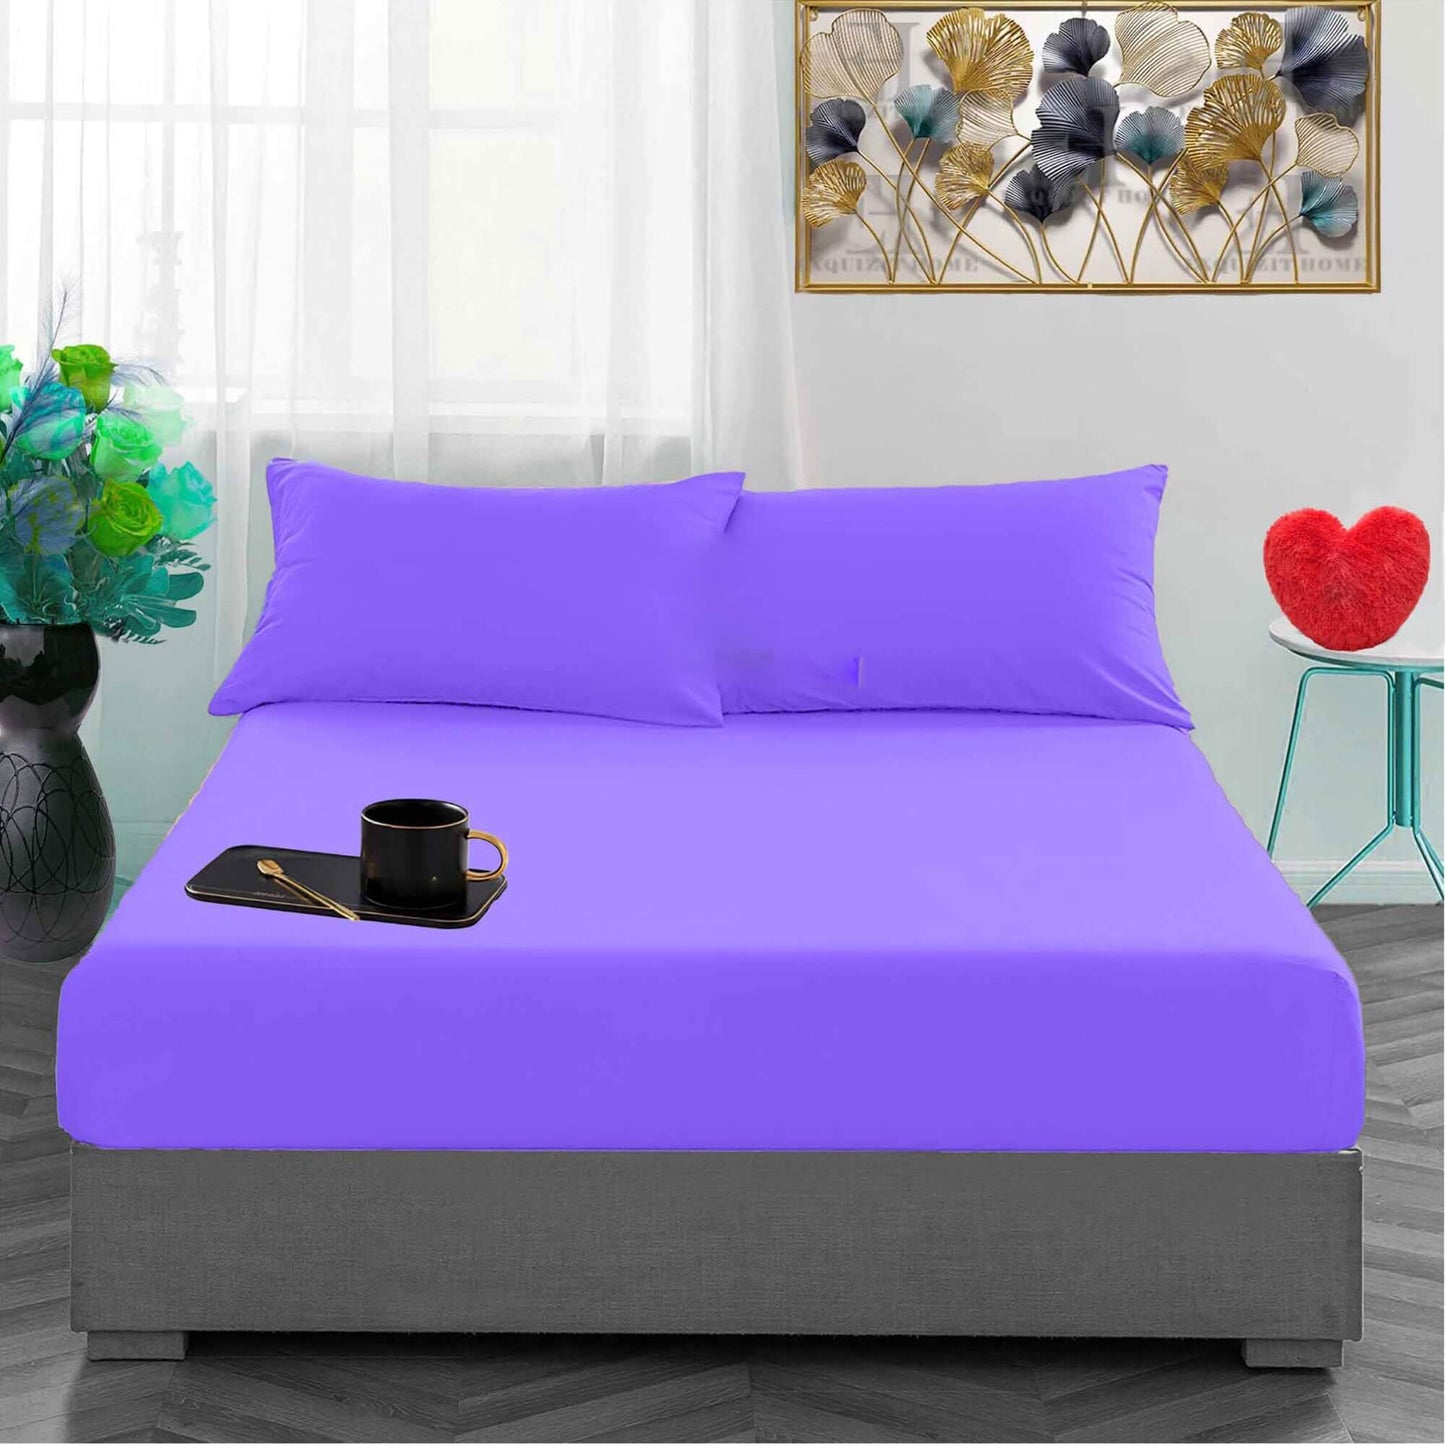 Small Double Fitted Sheet 100% Brushed Cotton Bed Sheet - TheComfortshop.co.ukBed Sheets0721718977292thecomfortshopTheComfortshop.co.ukFlannelette FIT Lilac 4FT-1Lilac4FT Small DoubleSmall Double Fitted Sheet 100% Brushed Cotton Bed Sheet - TheComfortshop.co.uk